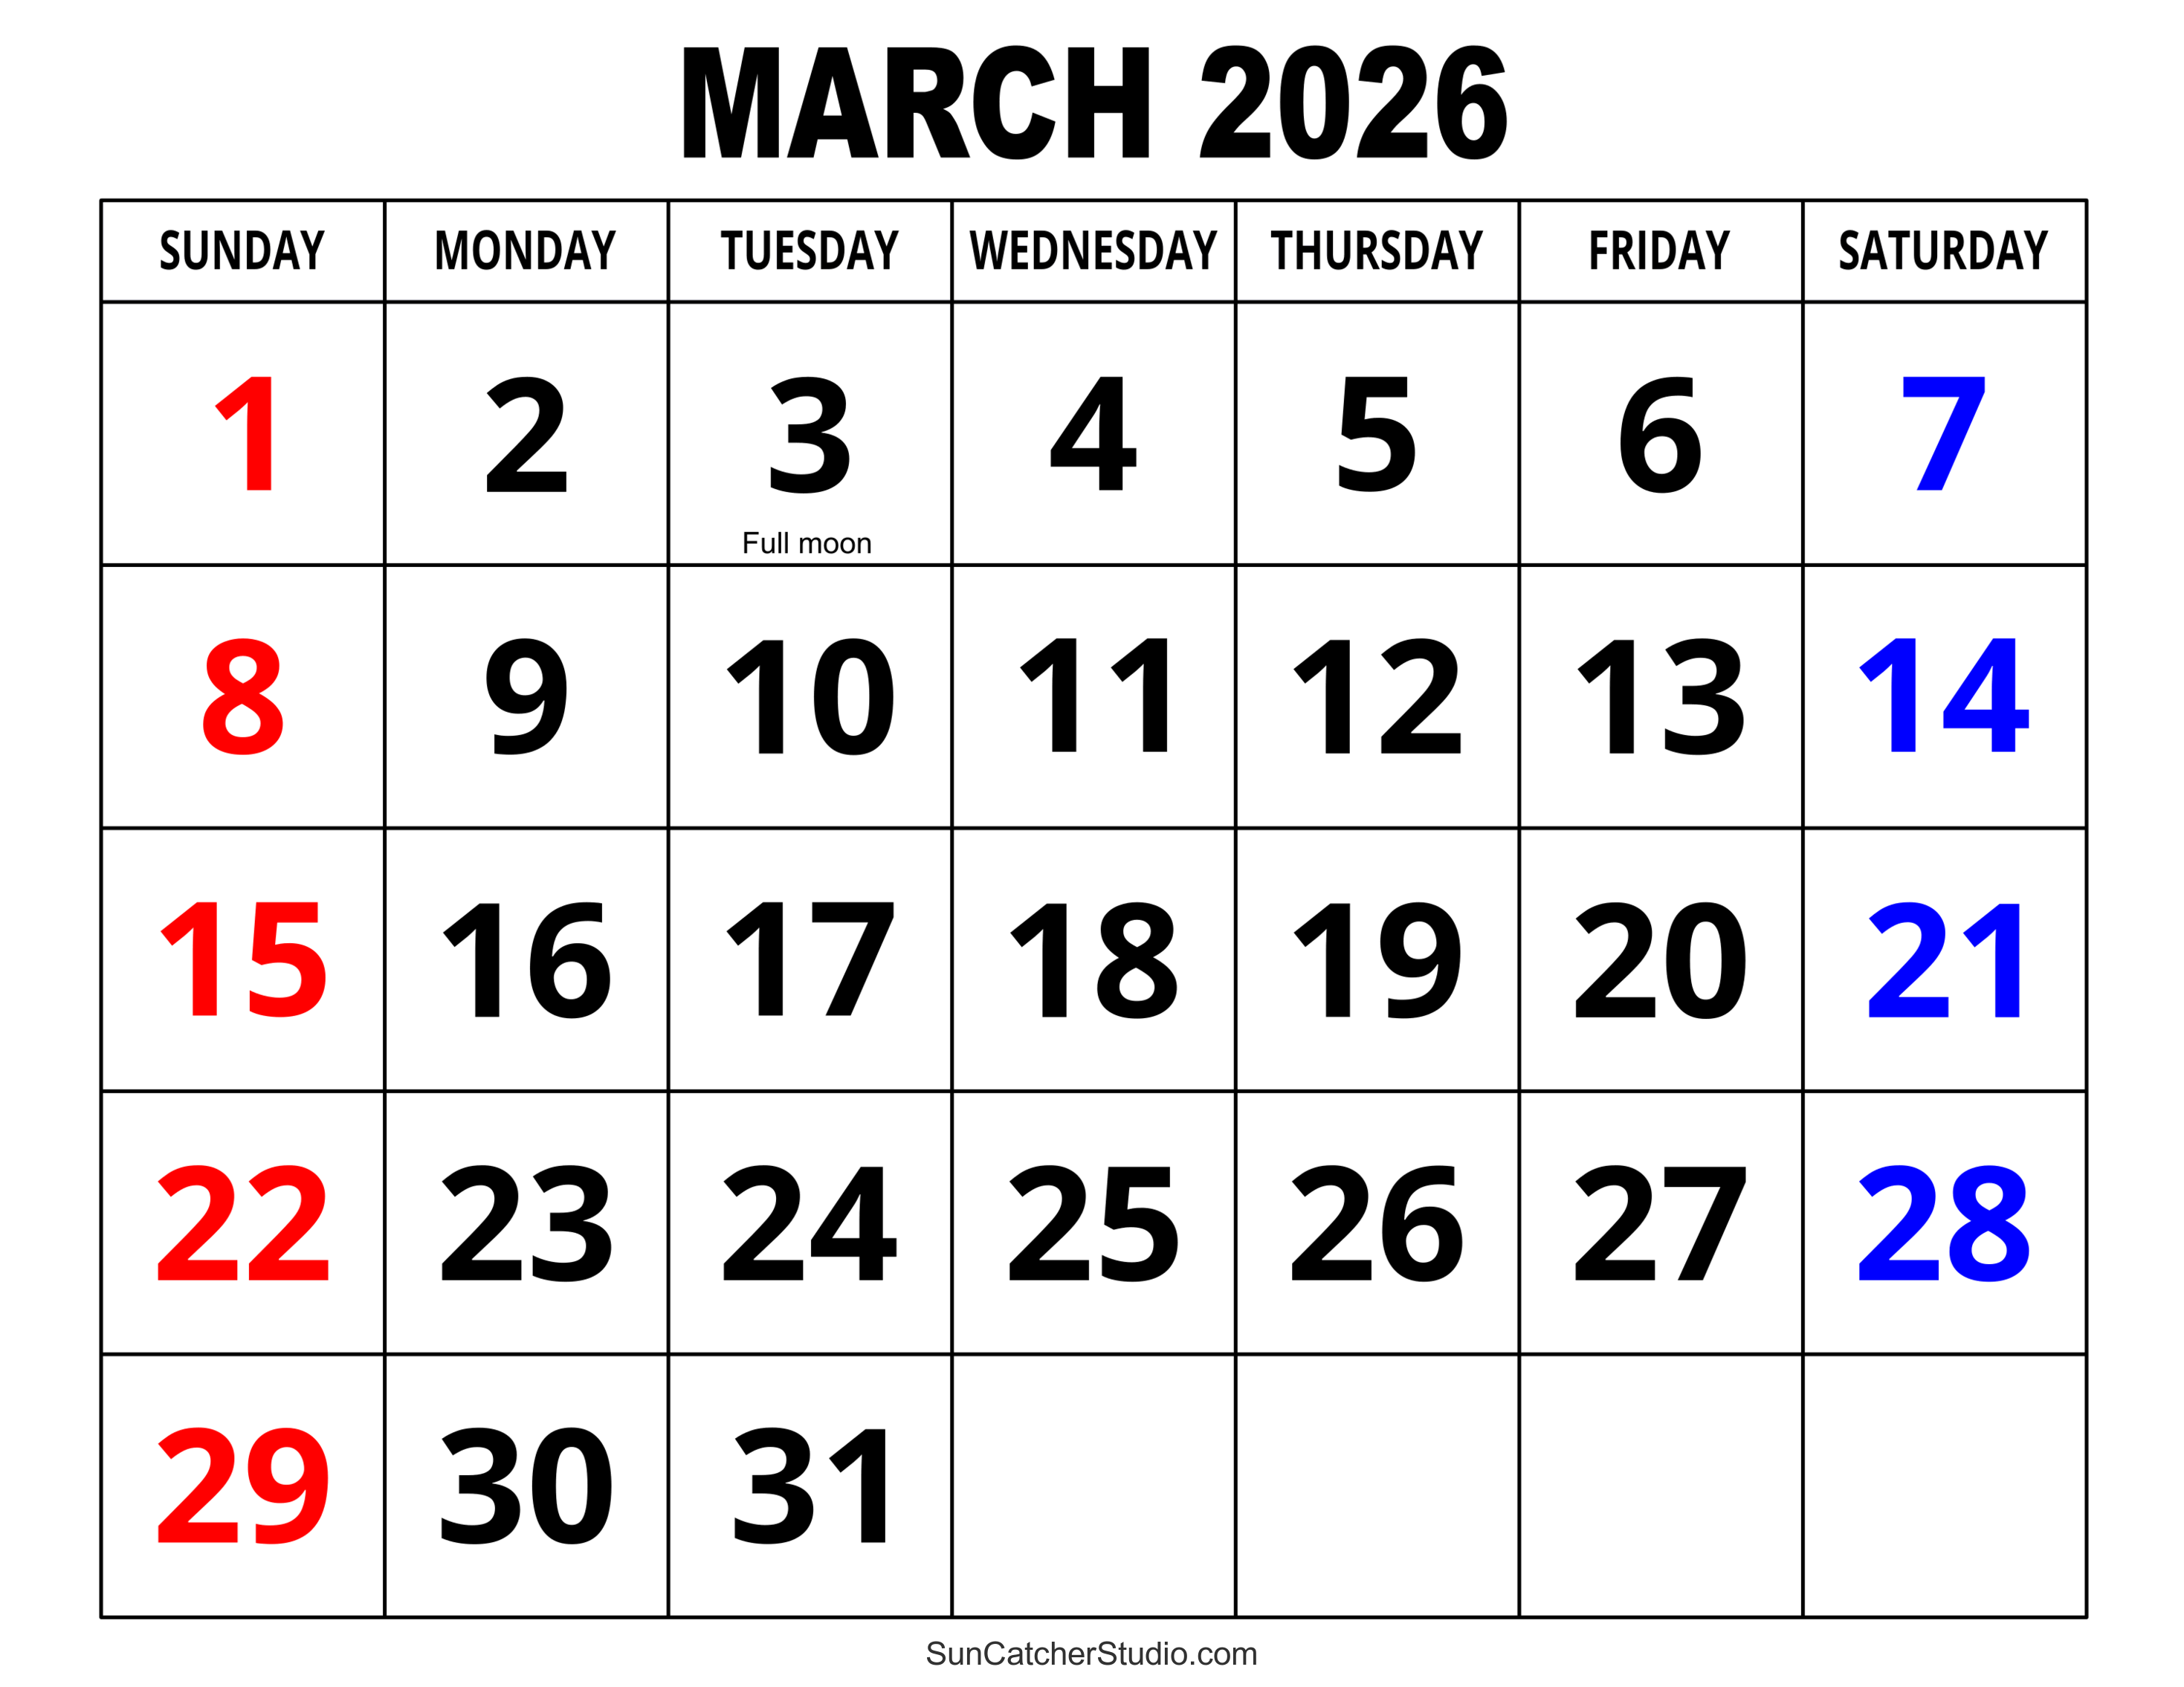 March 2026 Calendar (Free Printable) DIY Projects Patterns